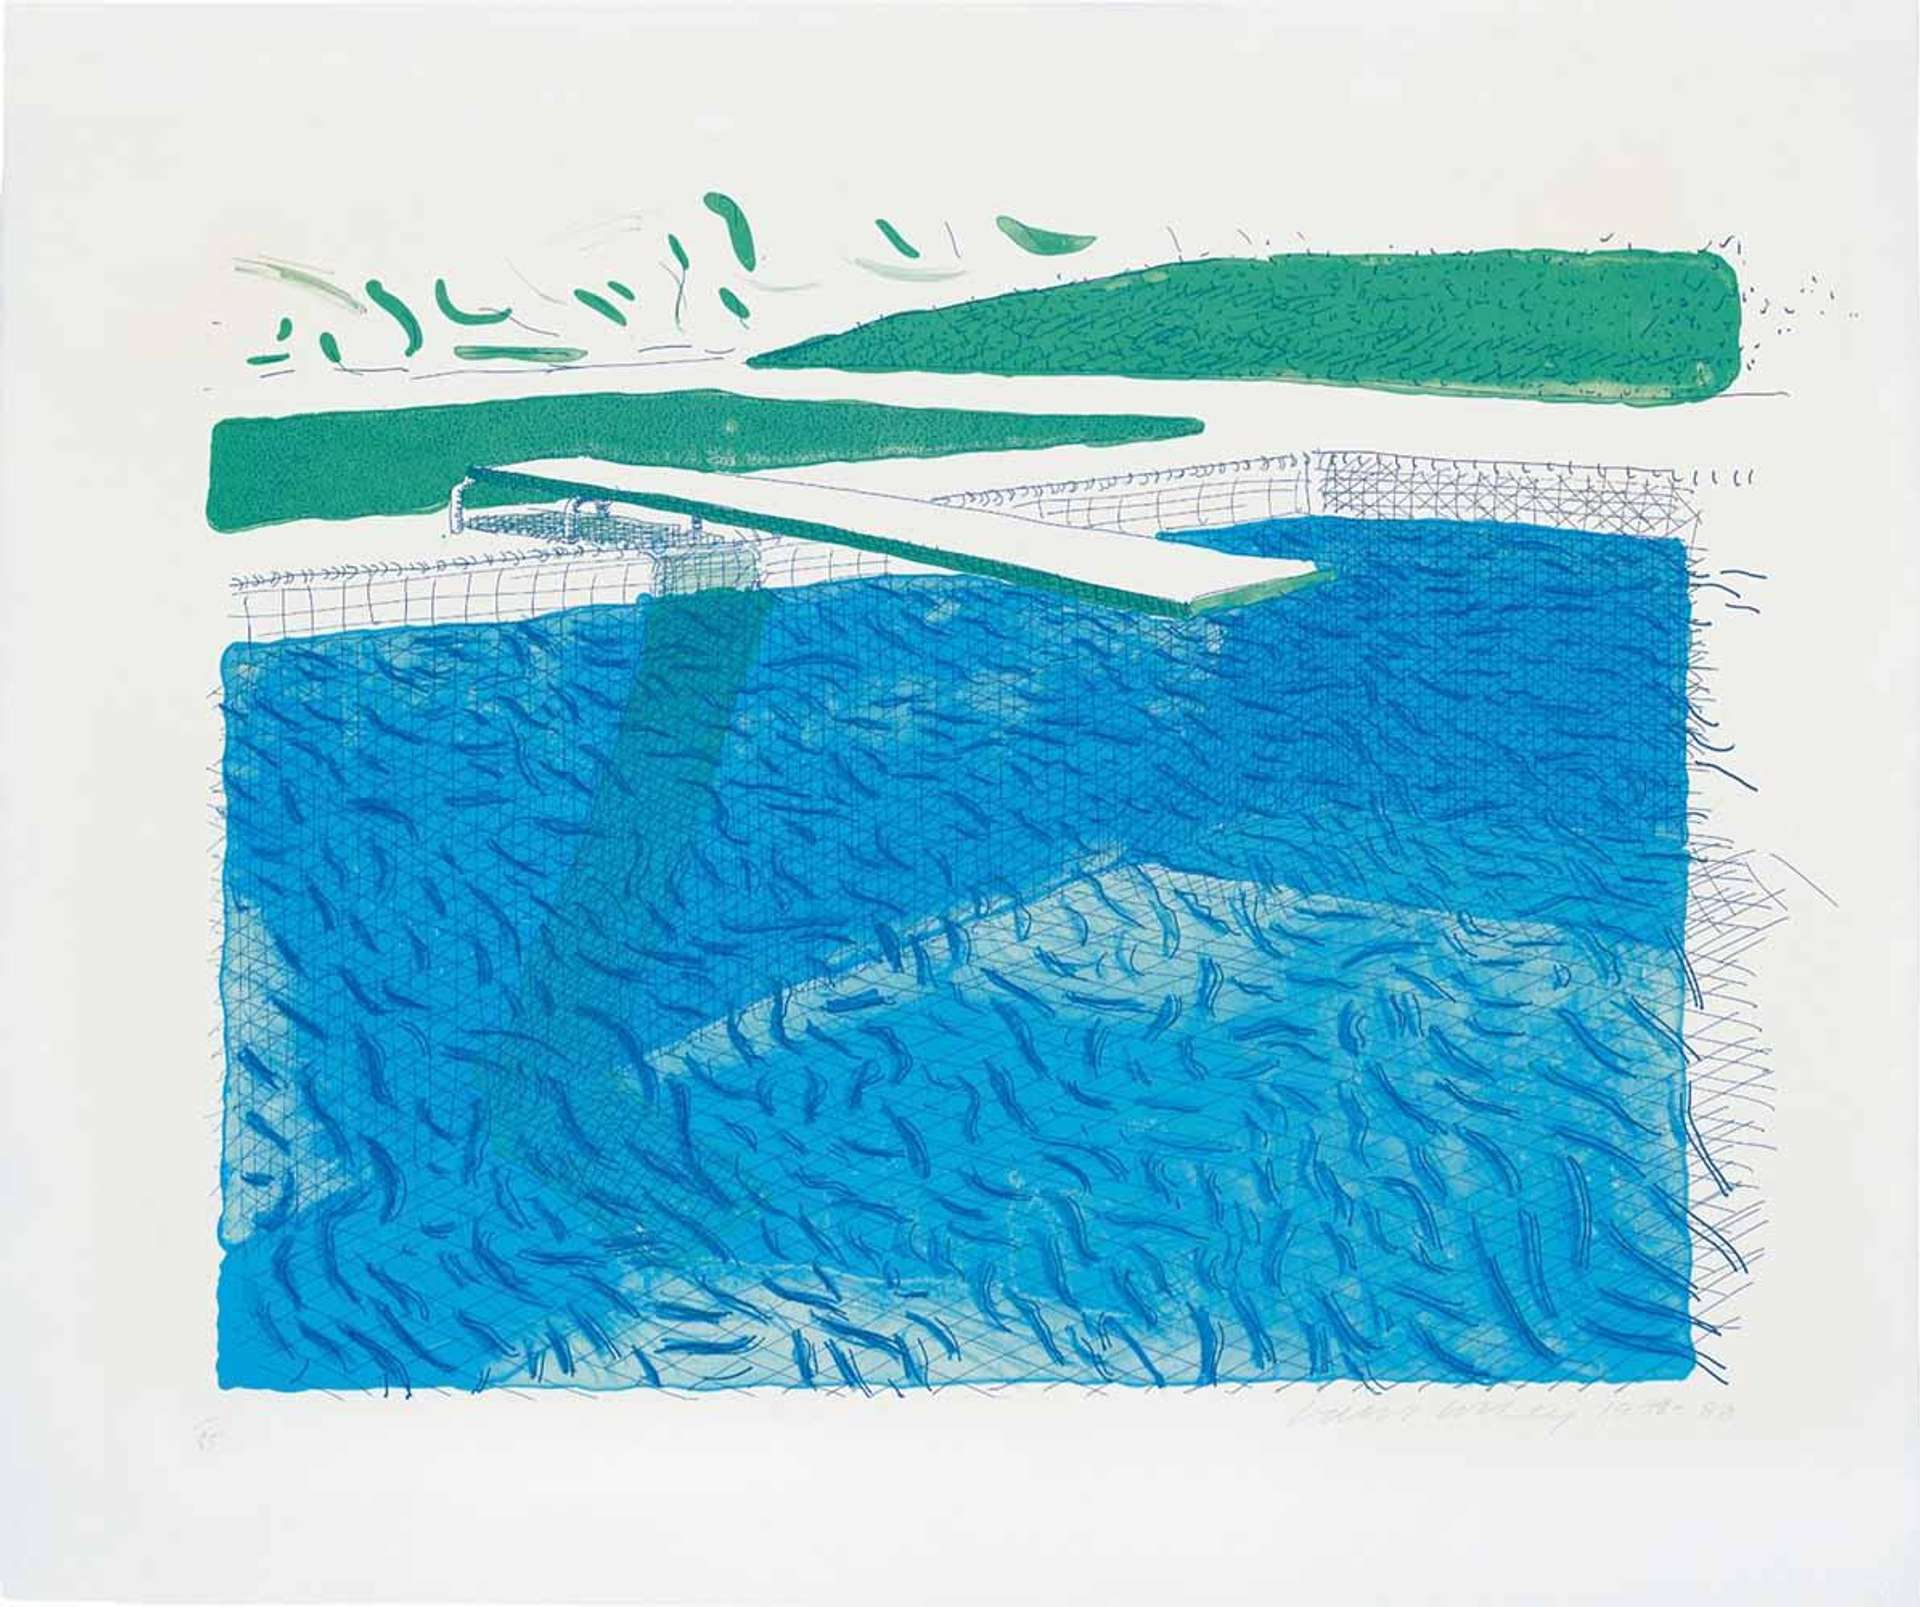 Lithograph print of a pool corner with a white diving board, turquoise grass, and vibrant blue water revealing rippling patterns and geometric pool floor tile